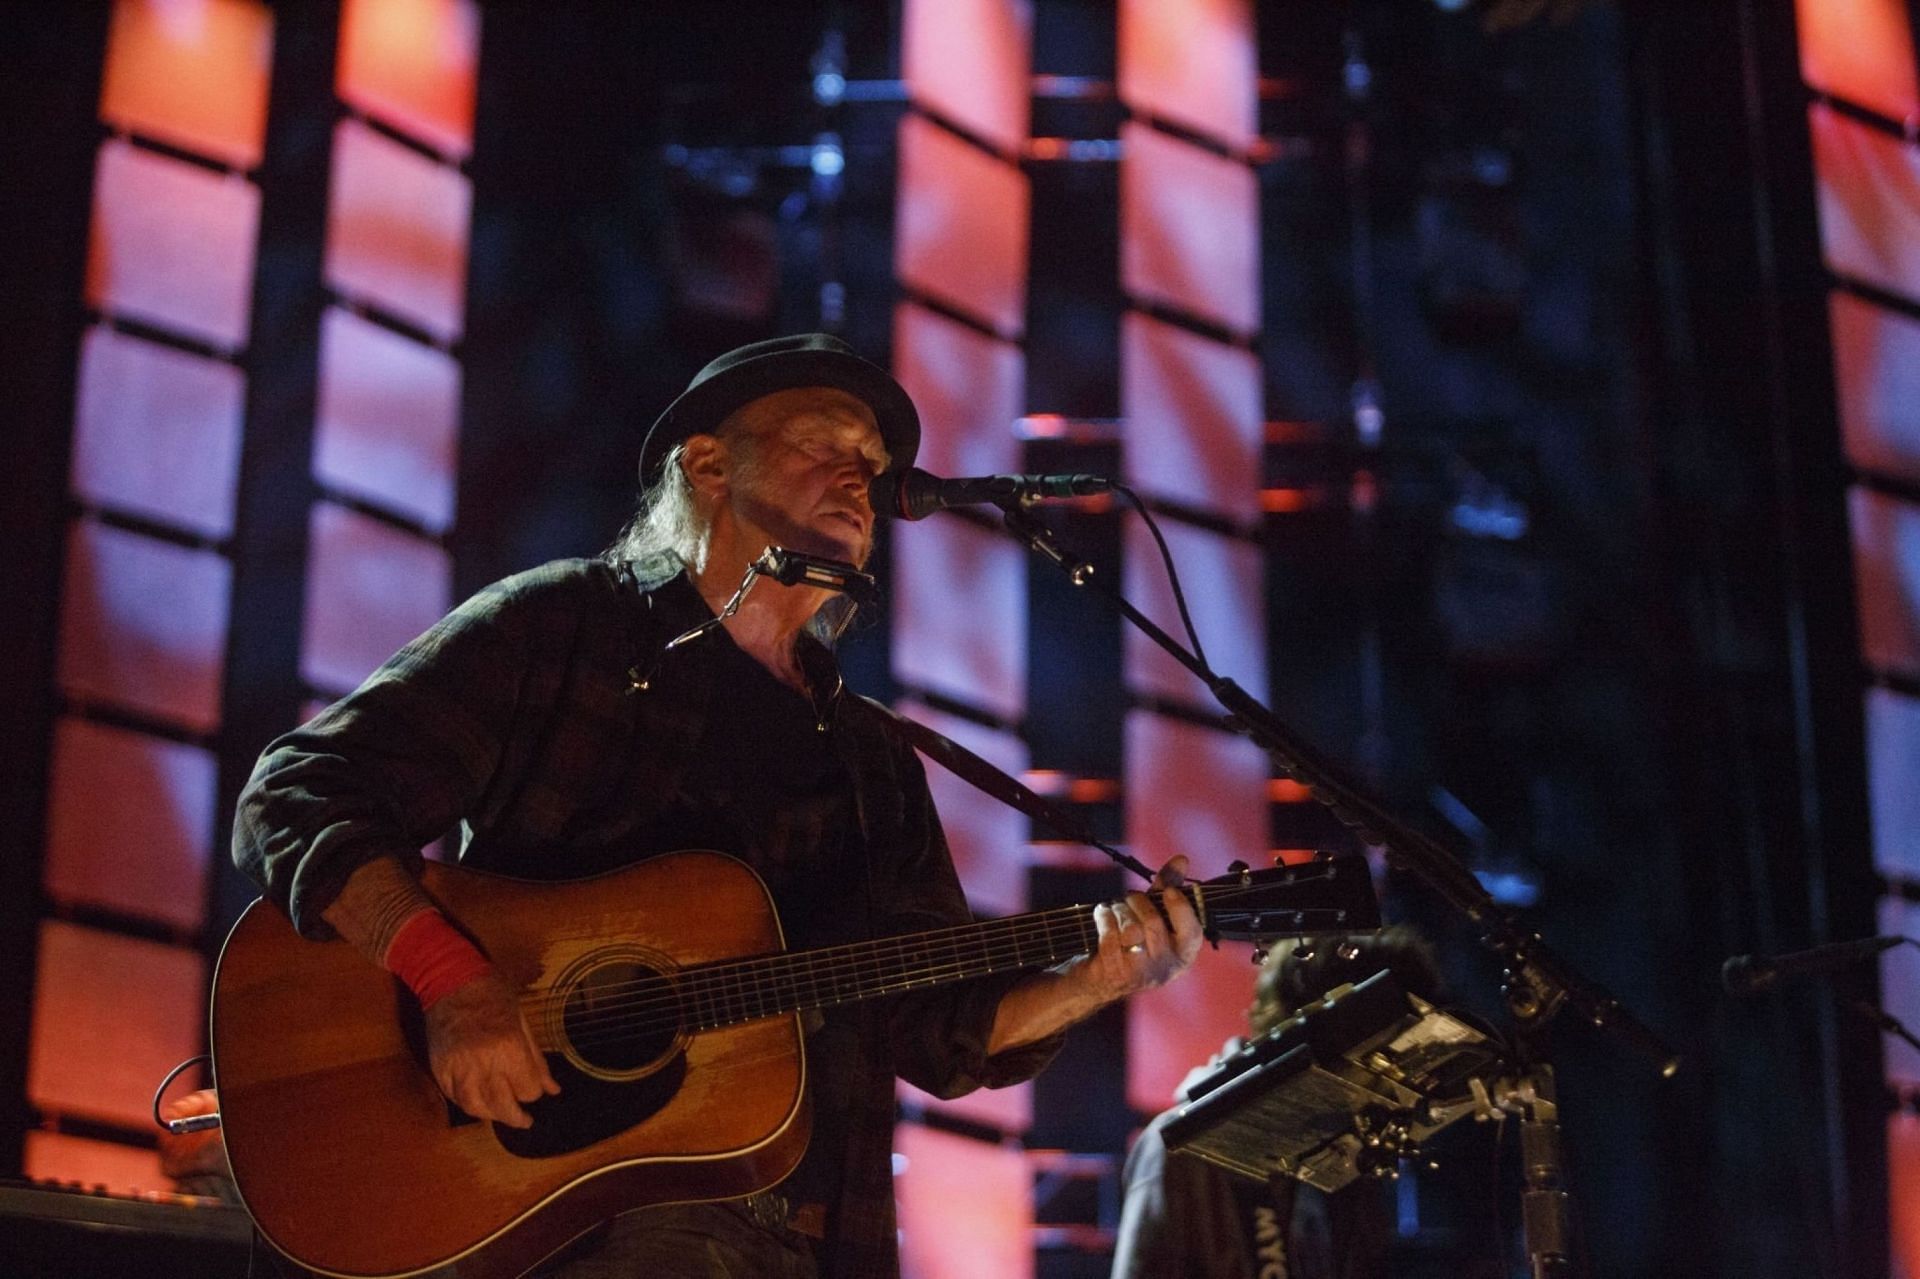 Neil Young performs during the Farm Aid festival in East Troy, Wisconsin, U.S., on Saturday, Sept. 21, 2019.(Image via Getty images)